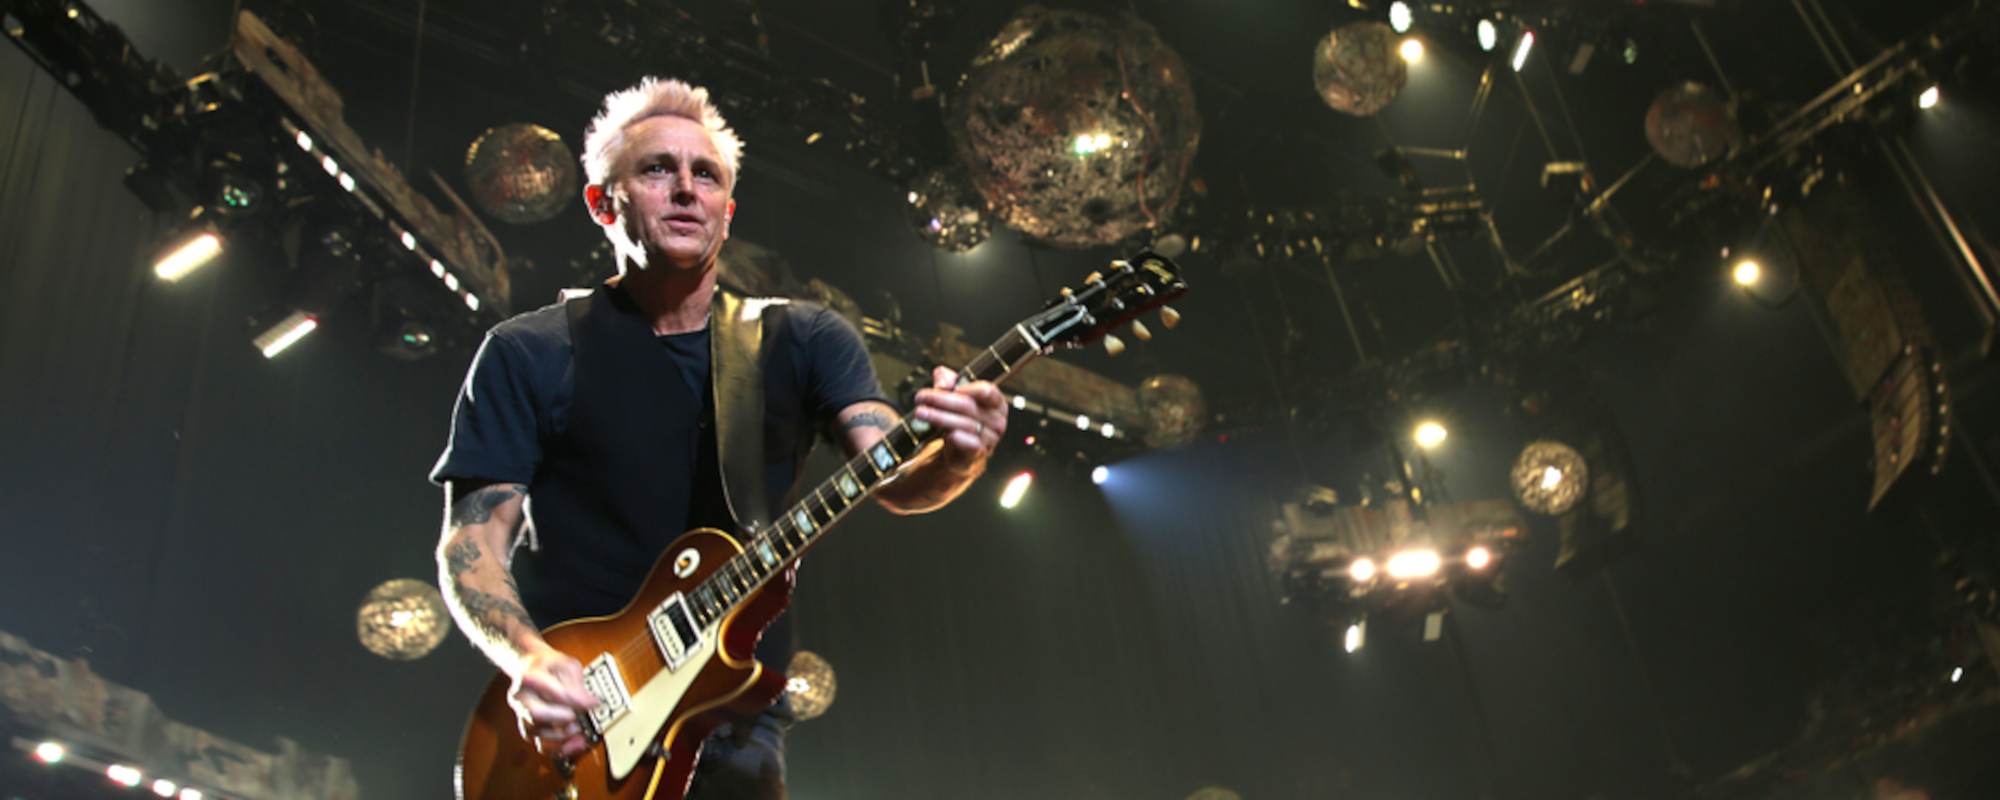 Pearl Jam’s Mike McCready Serves Up Iconic Sounds